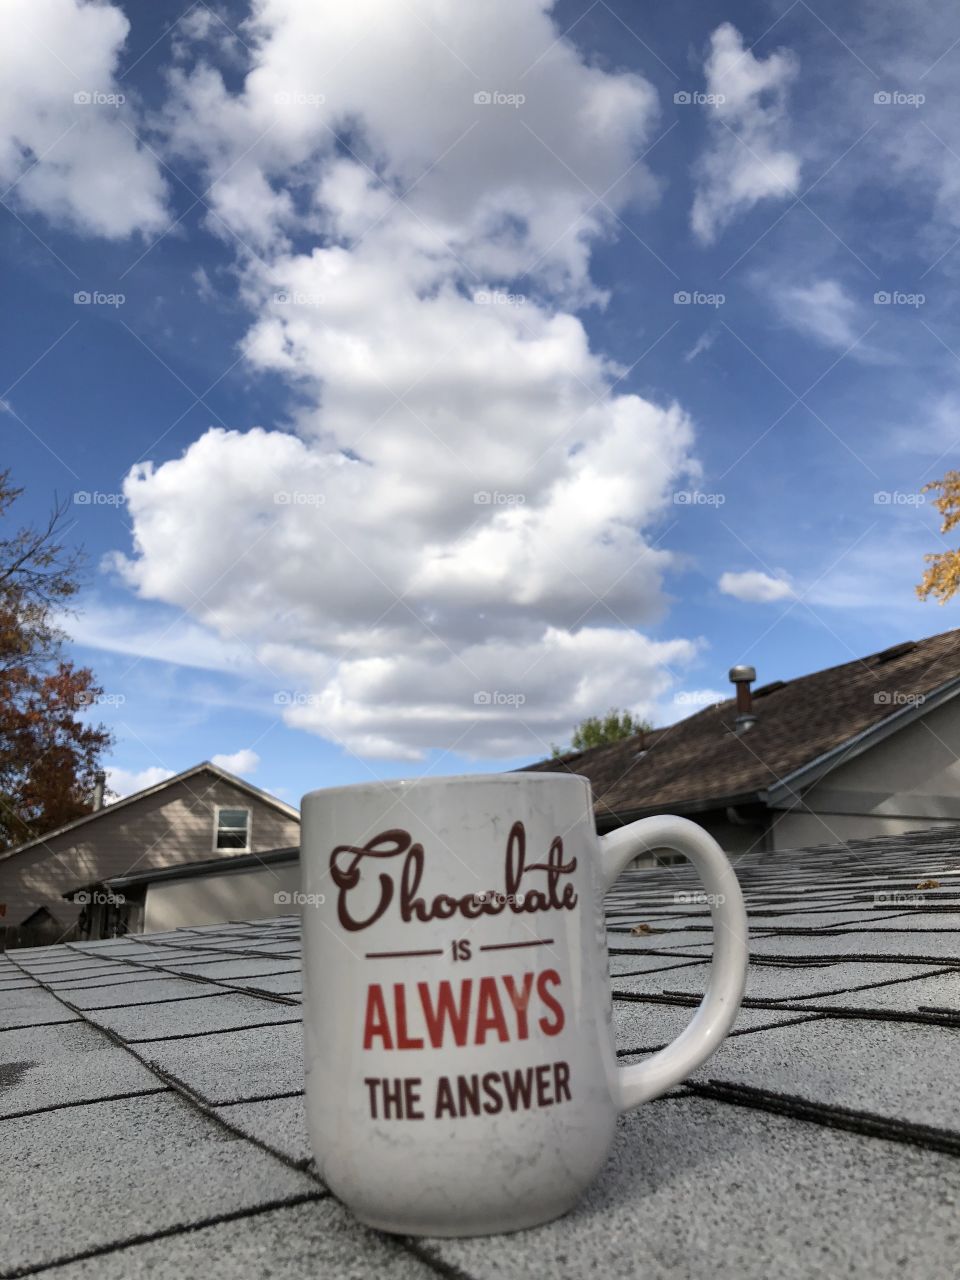 Hot chocolate on the rooftop